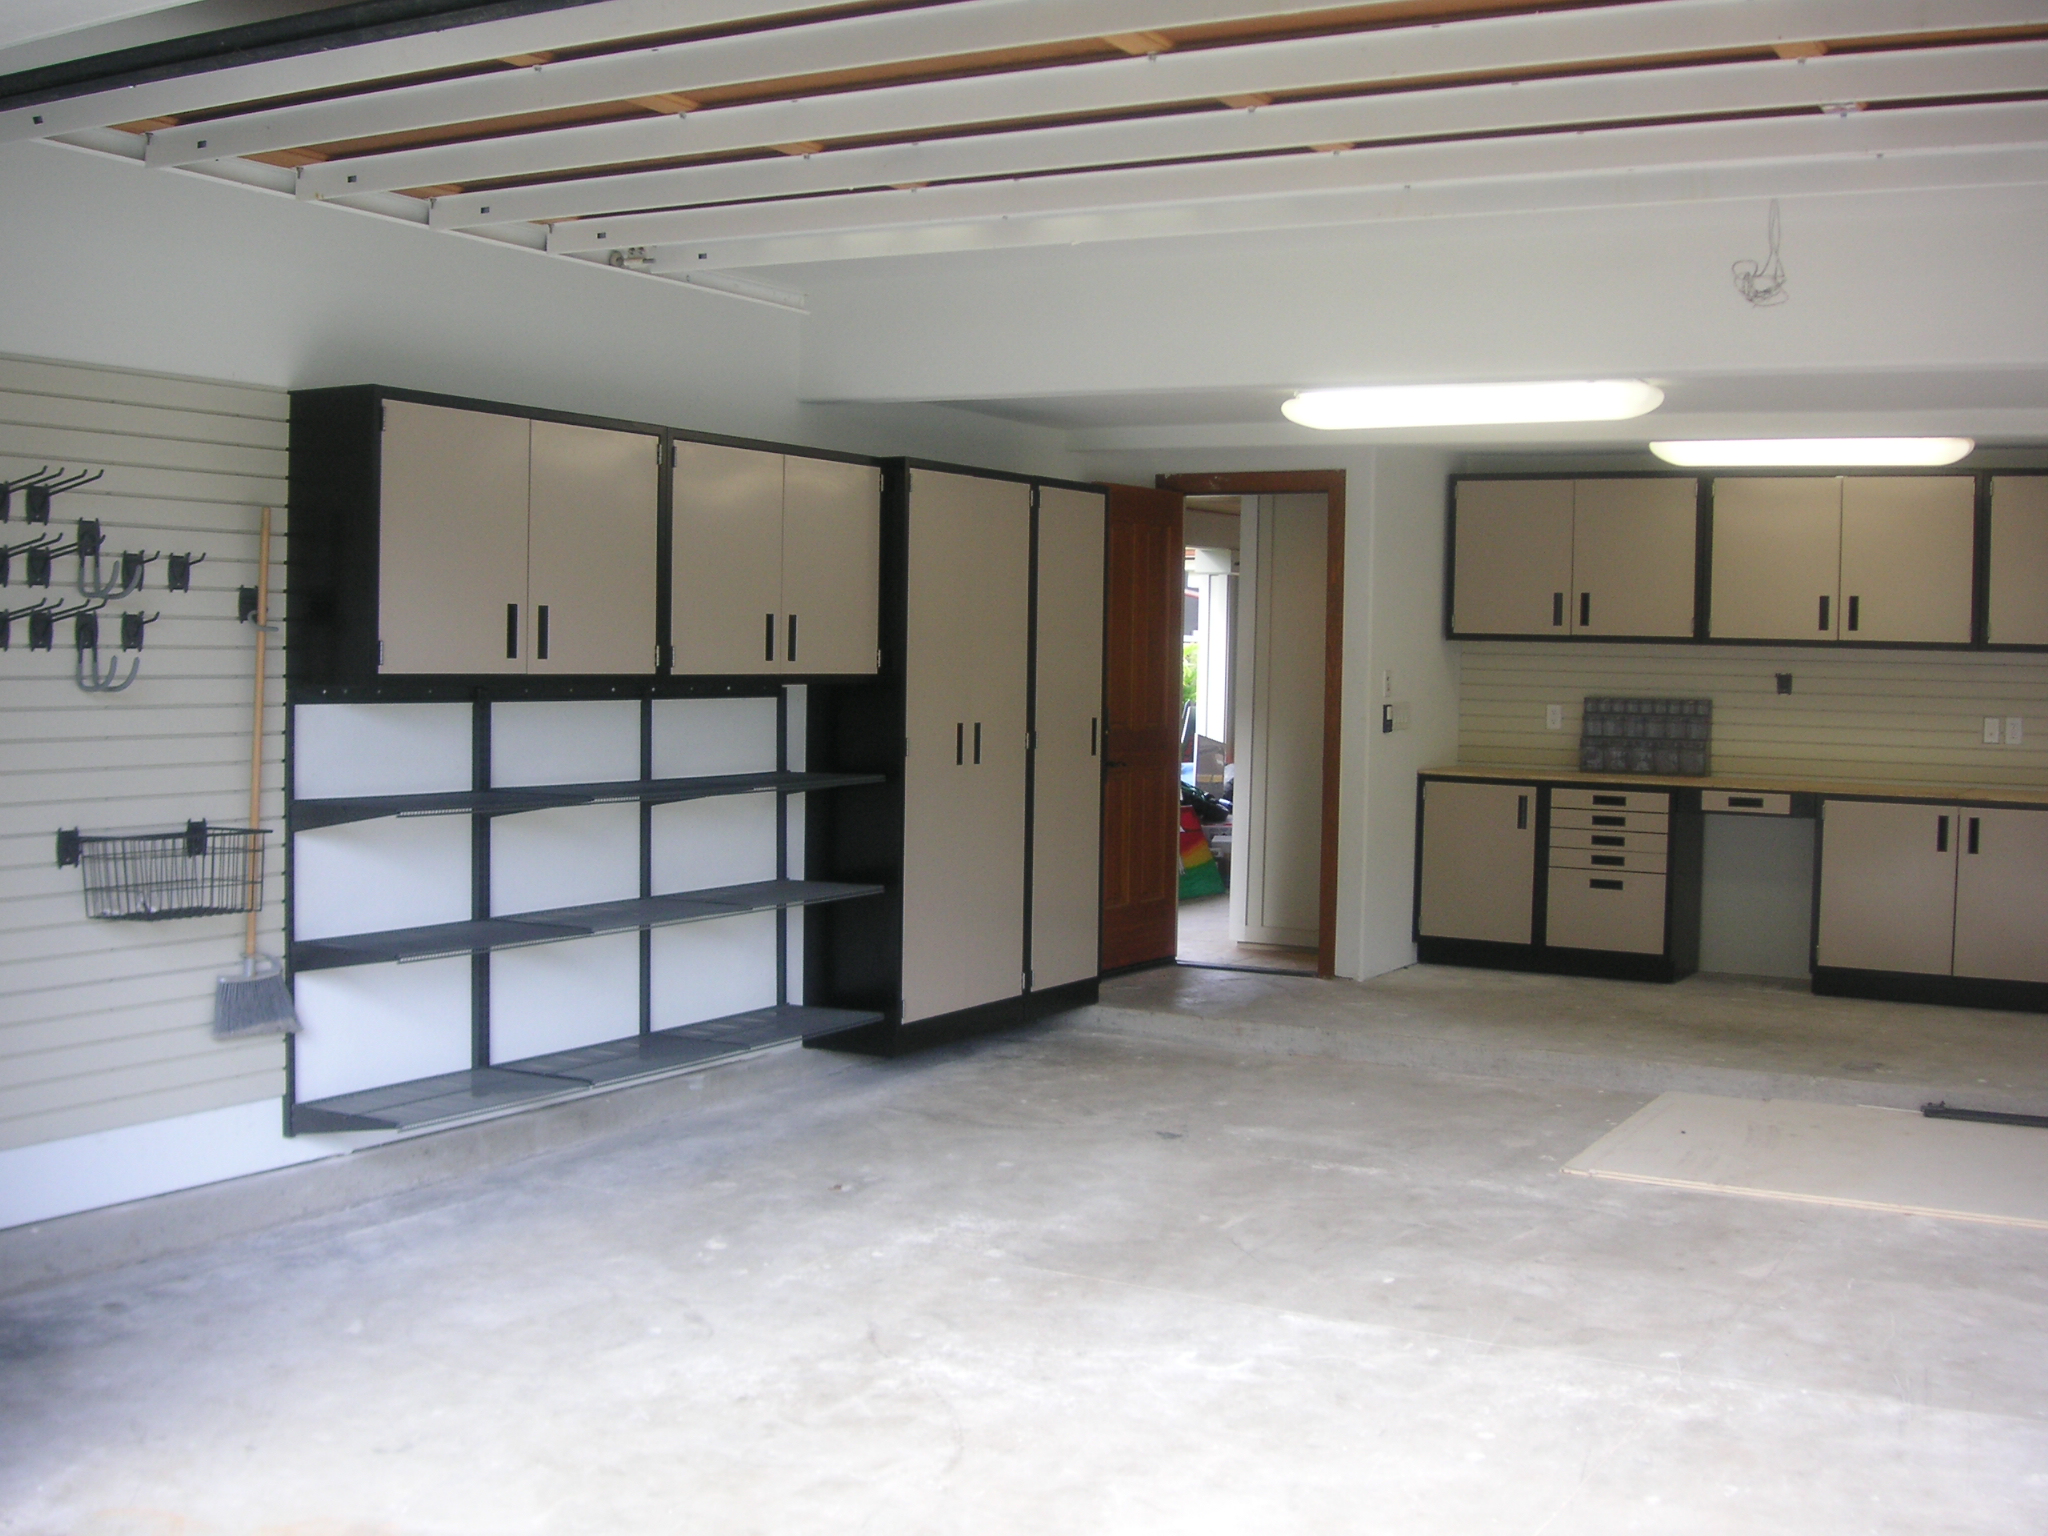 SYSTEMCENTER - Garage cabinets and shelving systems